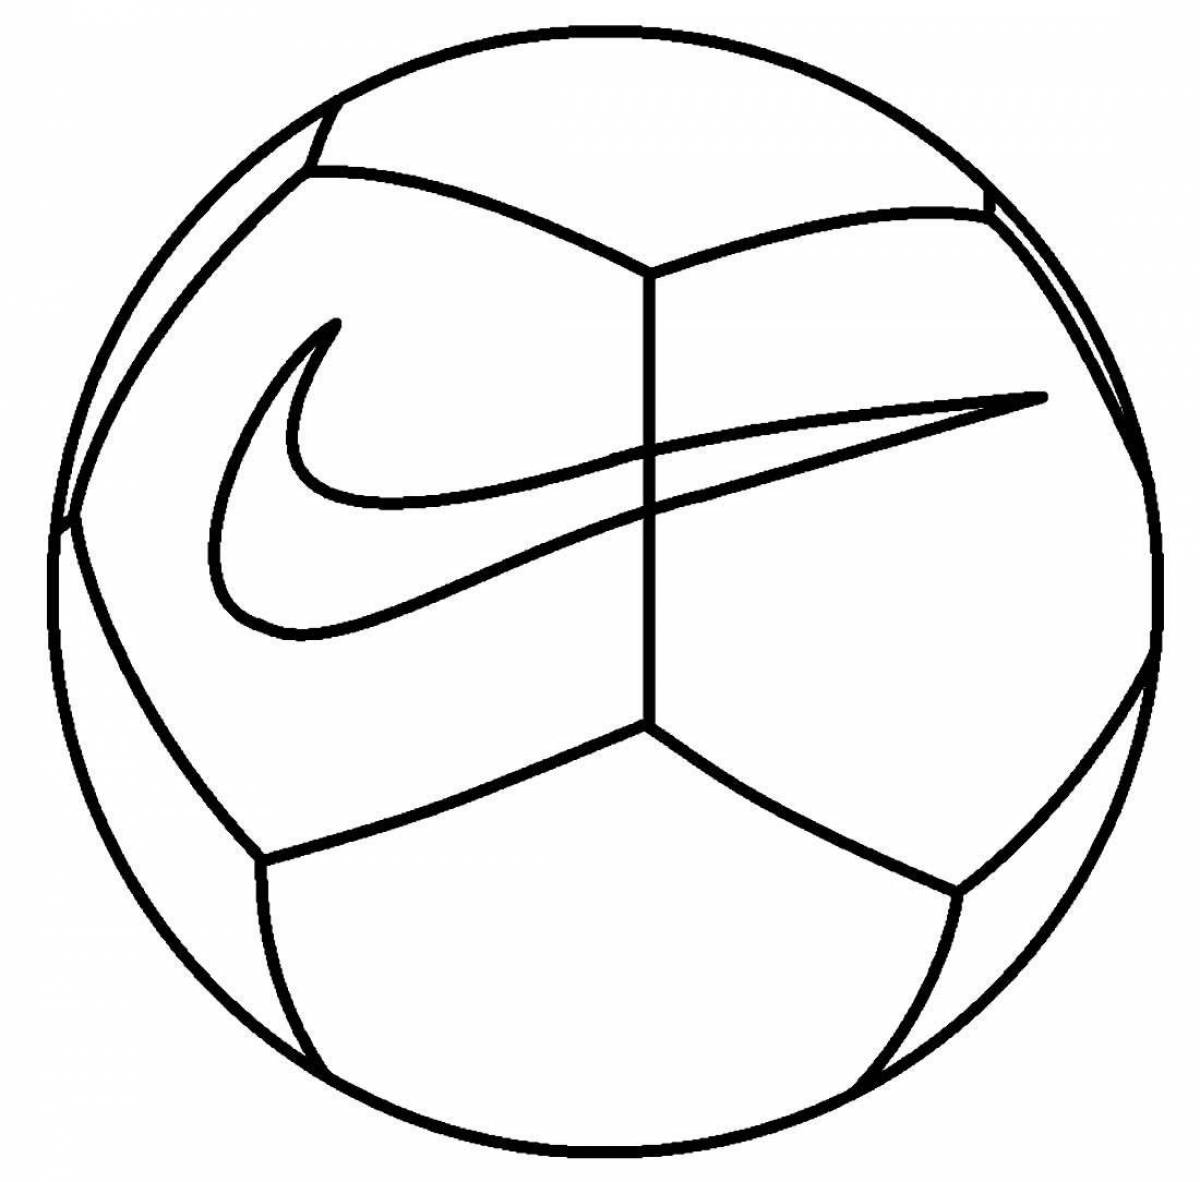 Fat ball coloring page